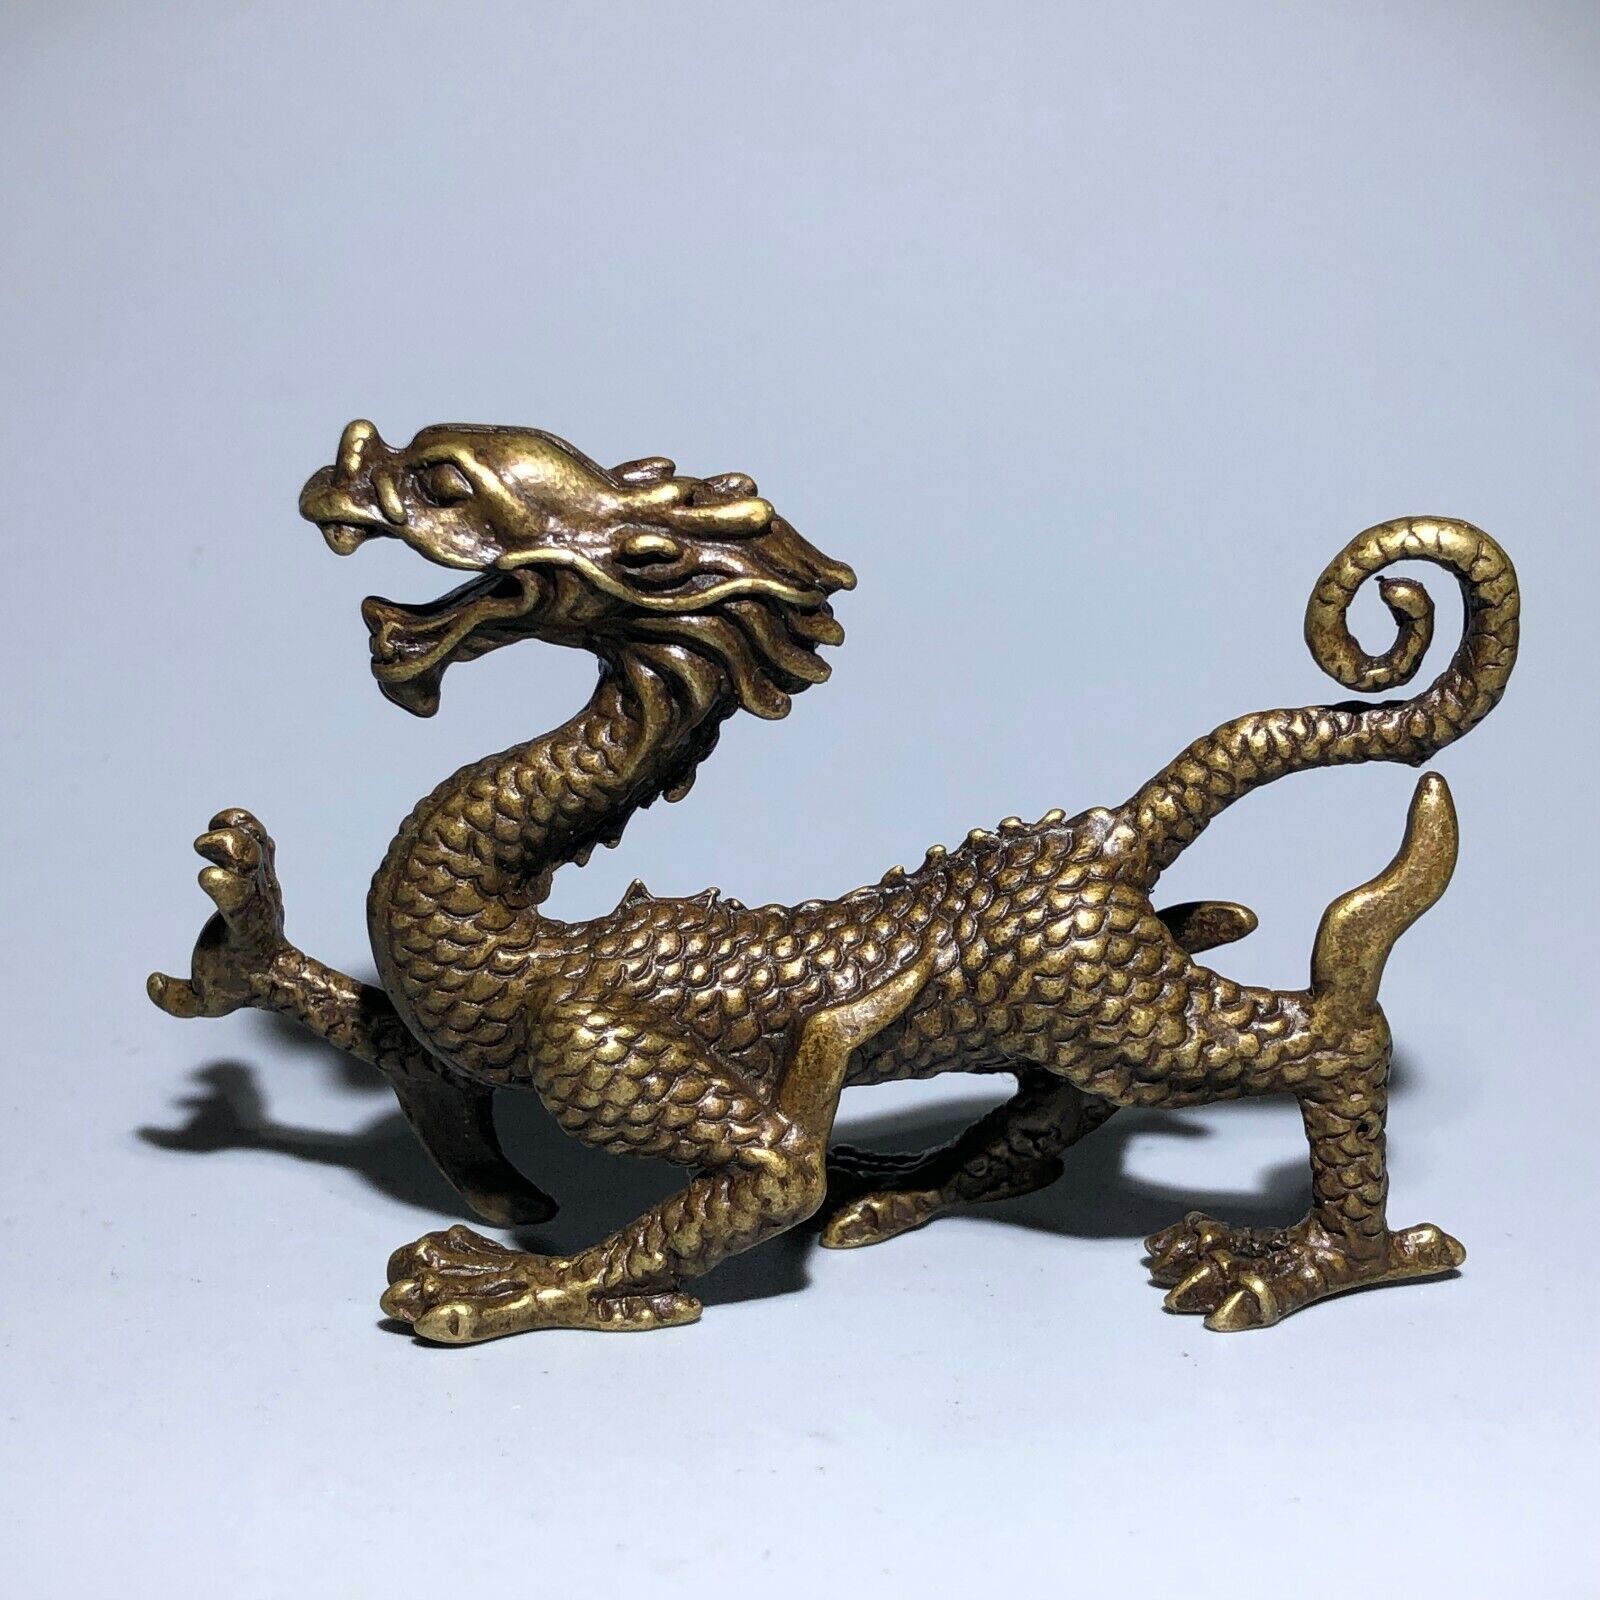 Chinese Old Vintage Solid Brass Handwork Collectible Dragon Ornament Statue